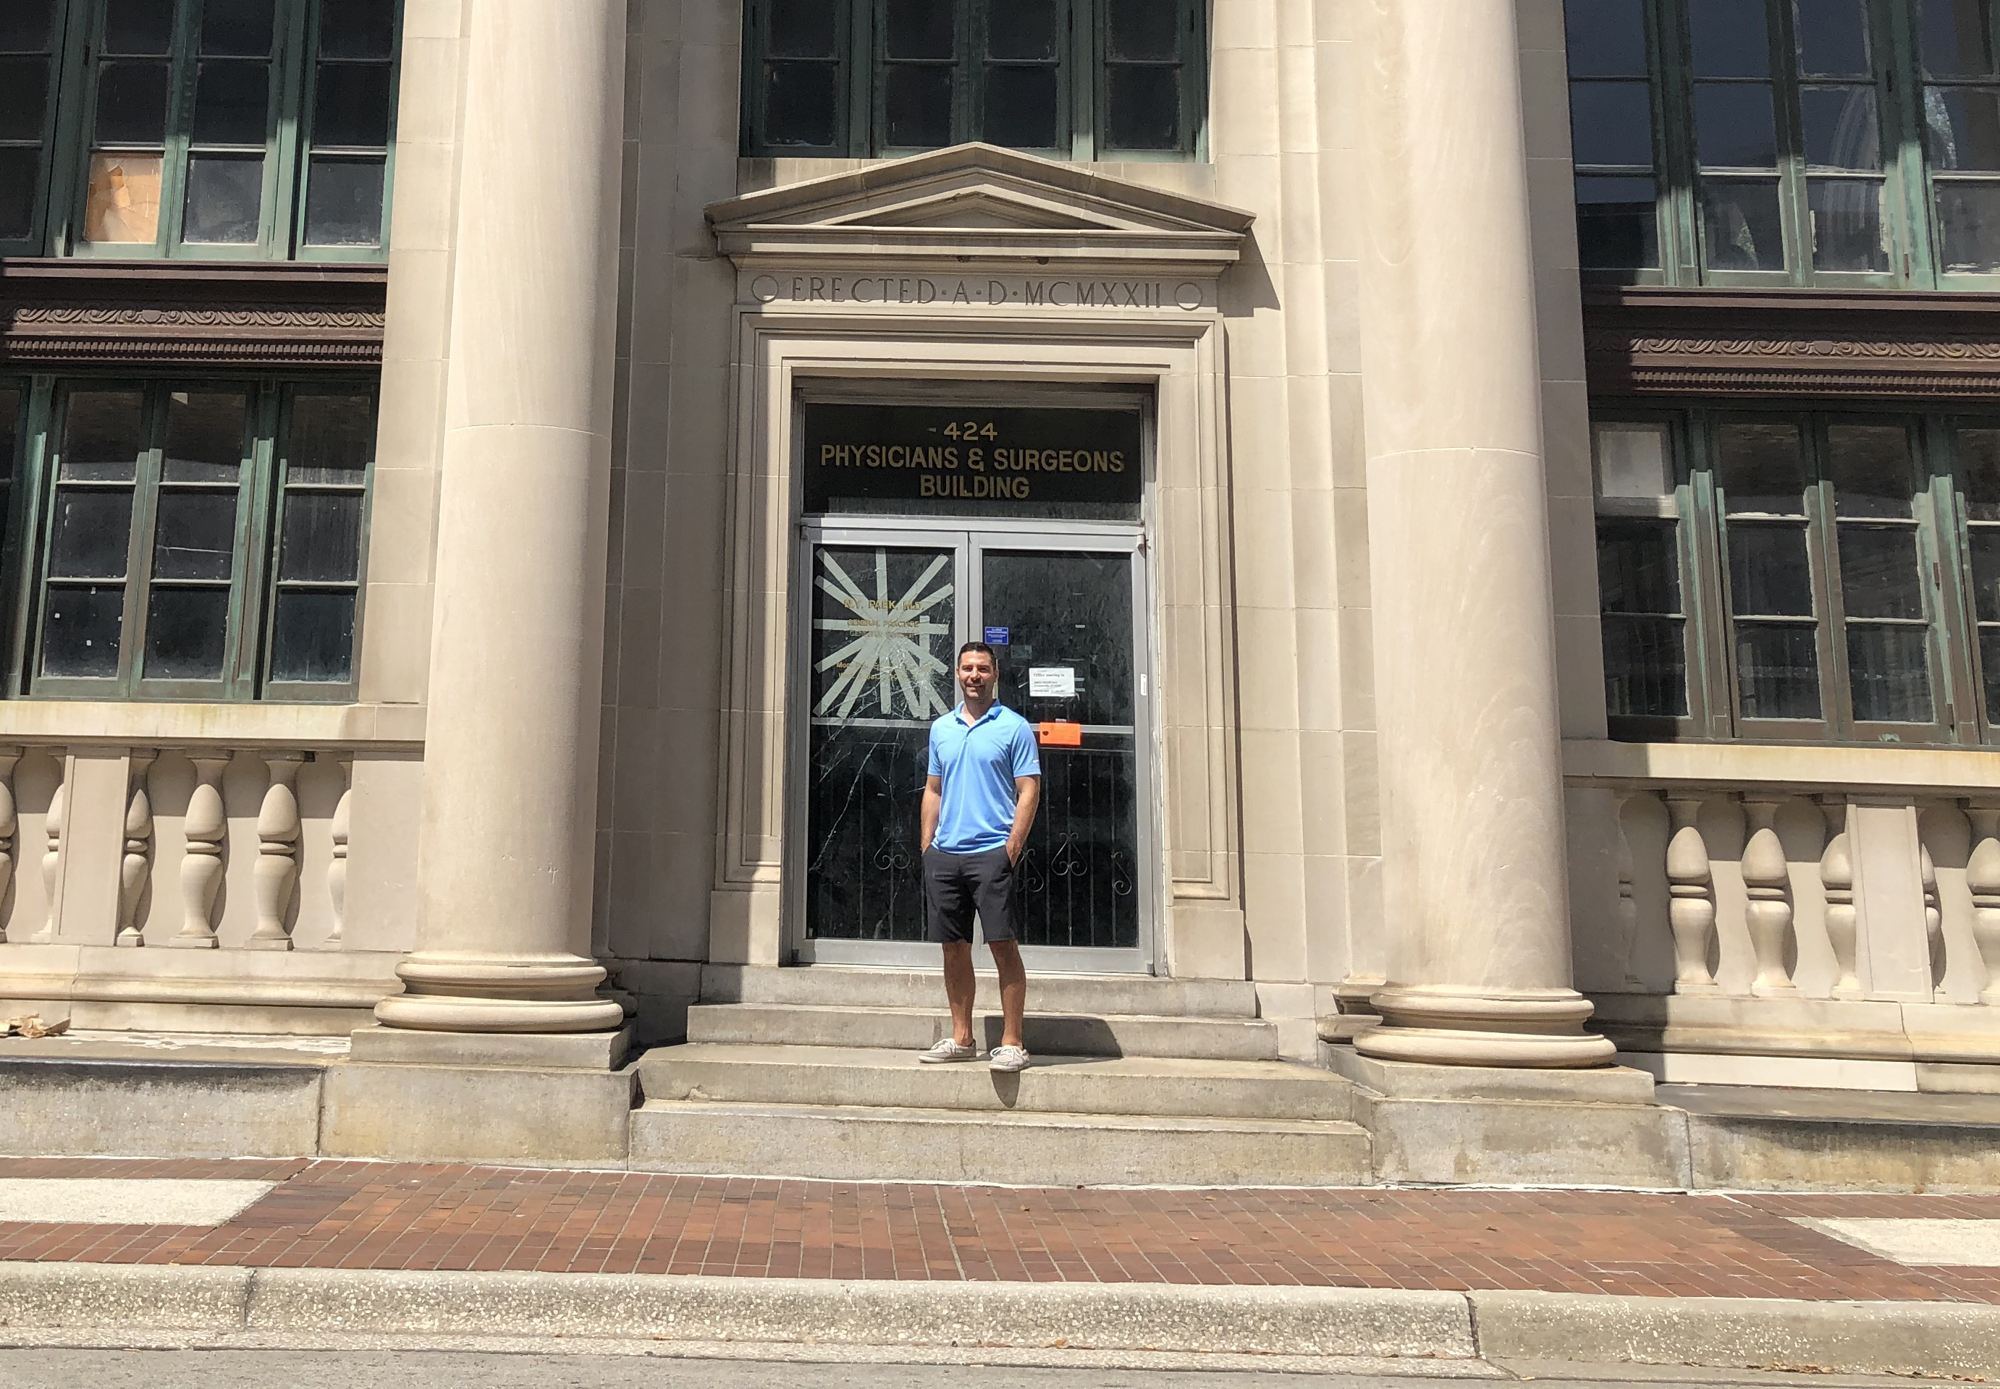 JWB Real Estate Capital President Alex Sifakis outside the Federal Reserve Bank Building at 424 N. Hogan St.